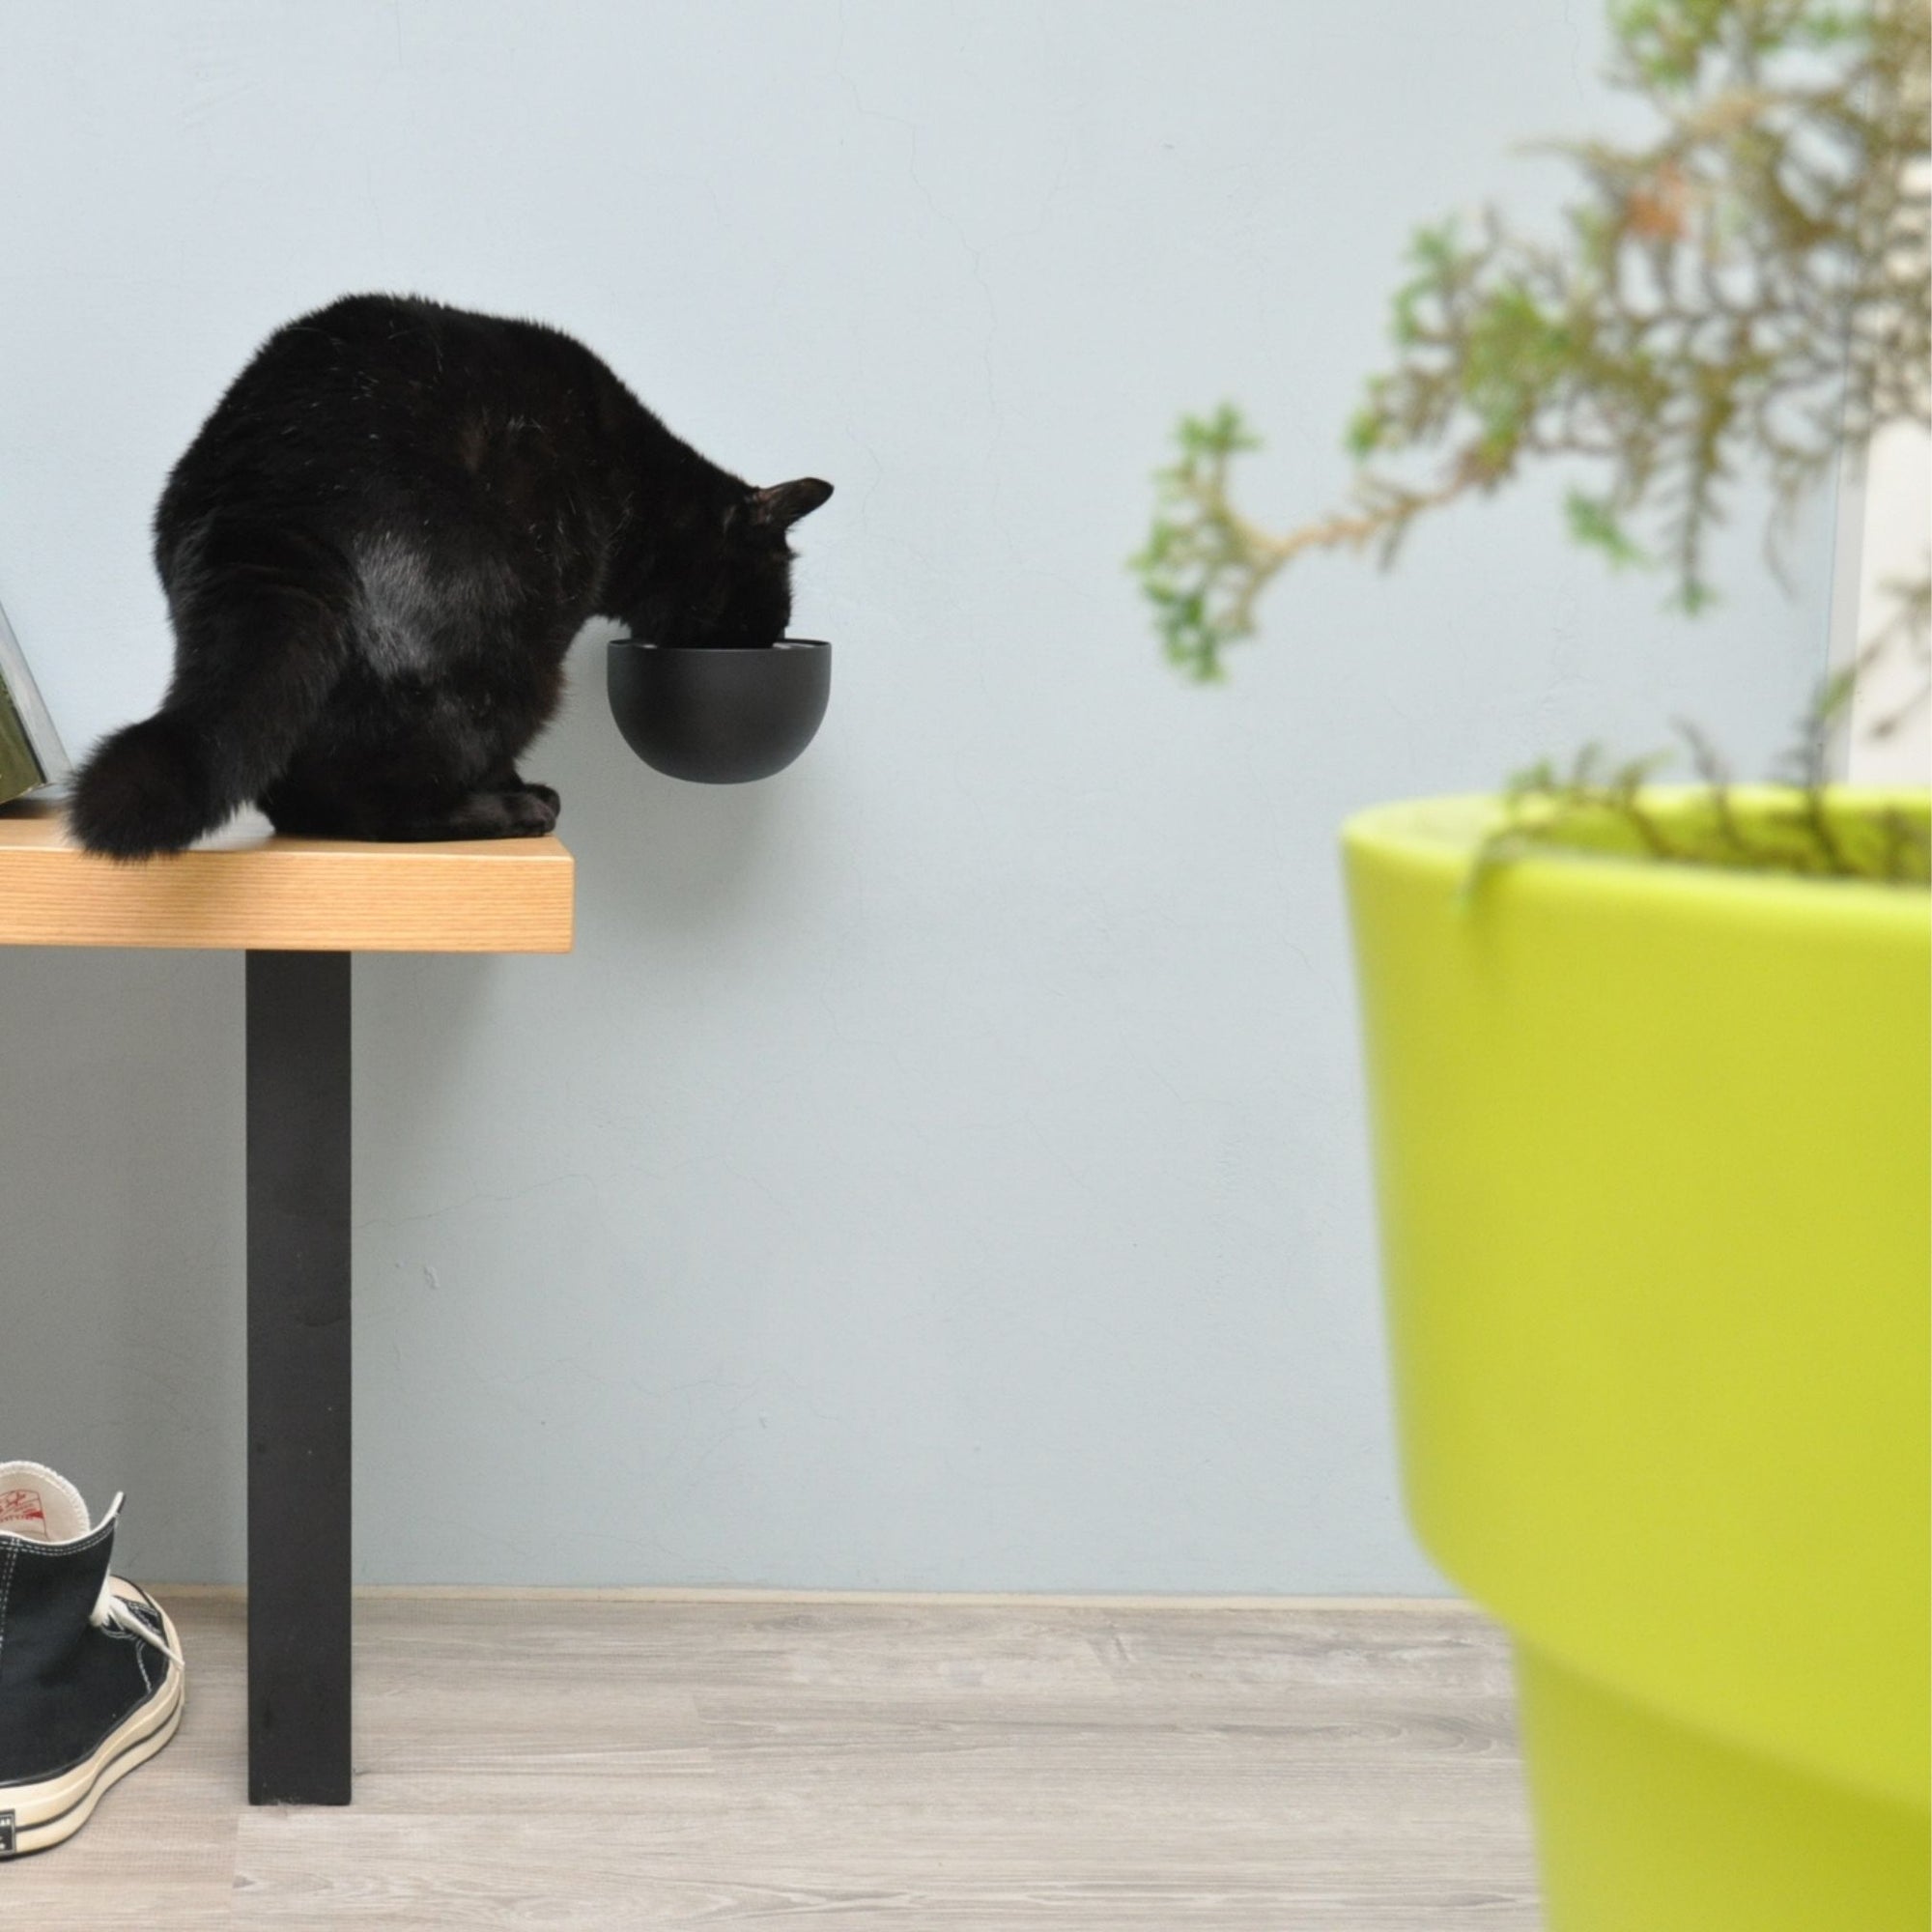 Your dog or cat will love the self-magnetic portable mobile pet bowl!